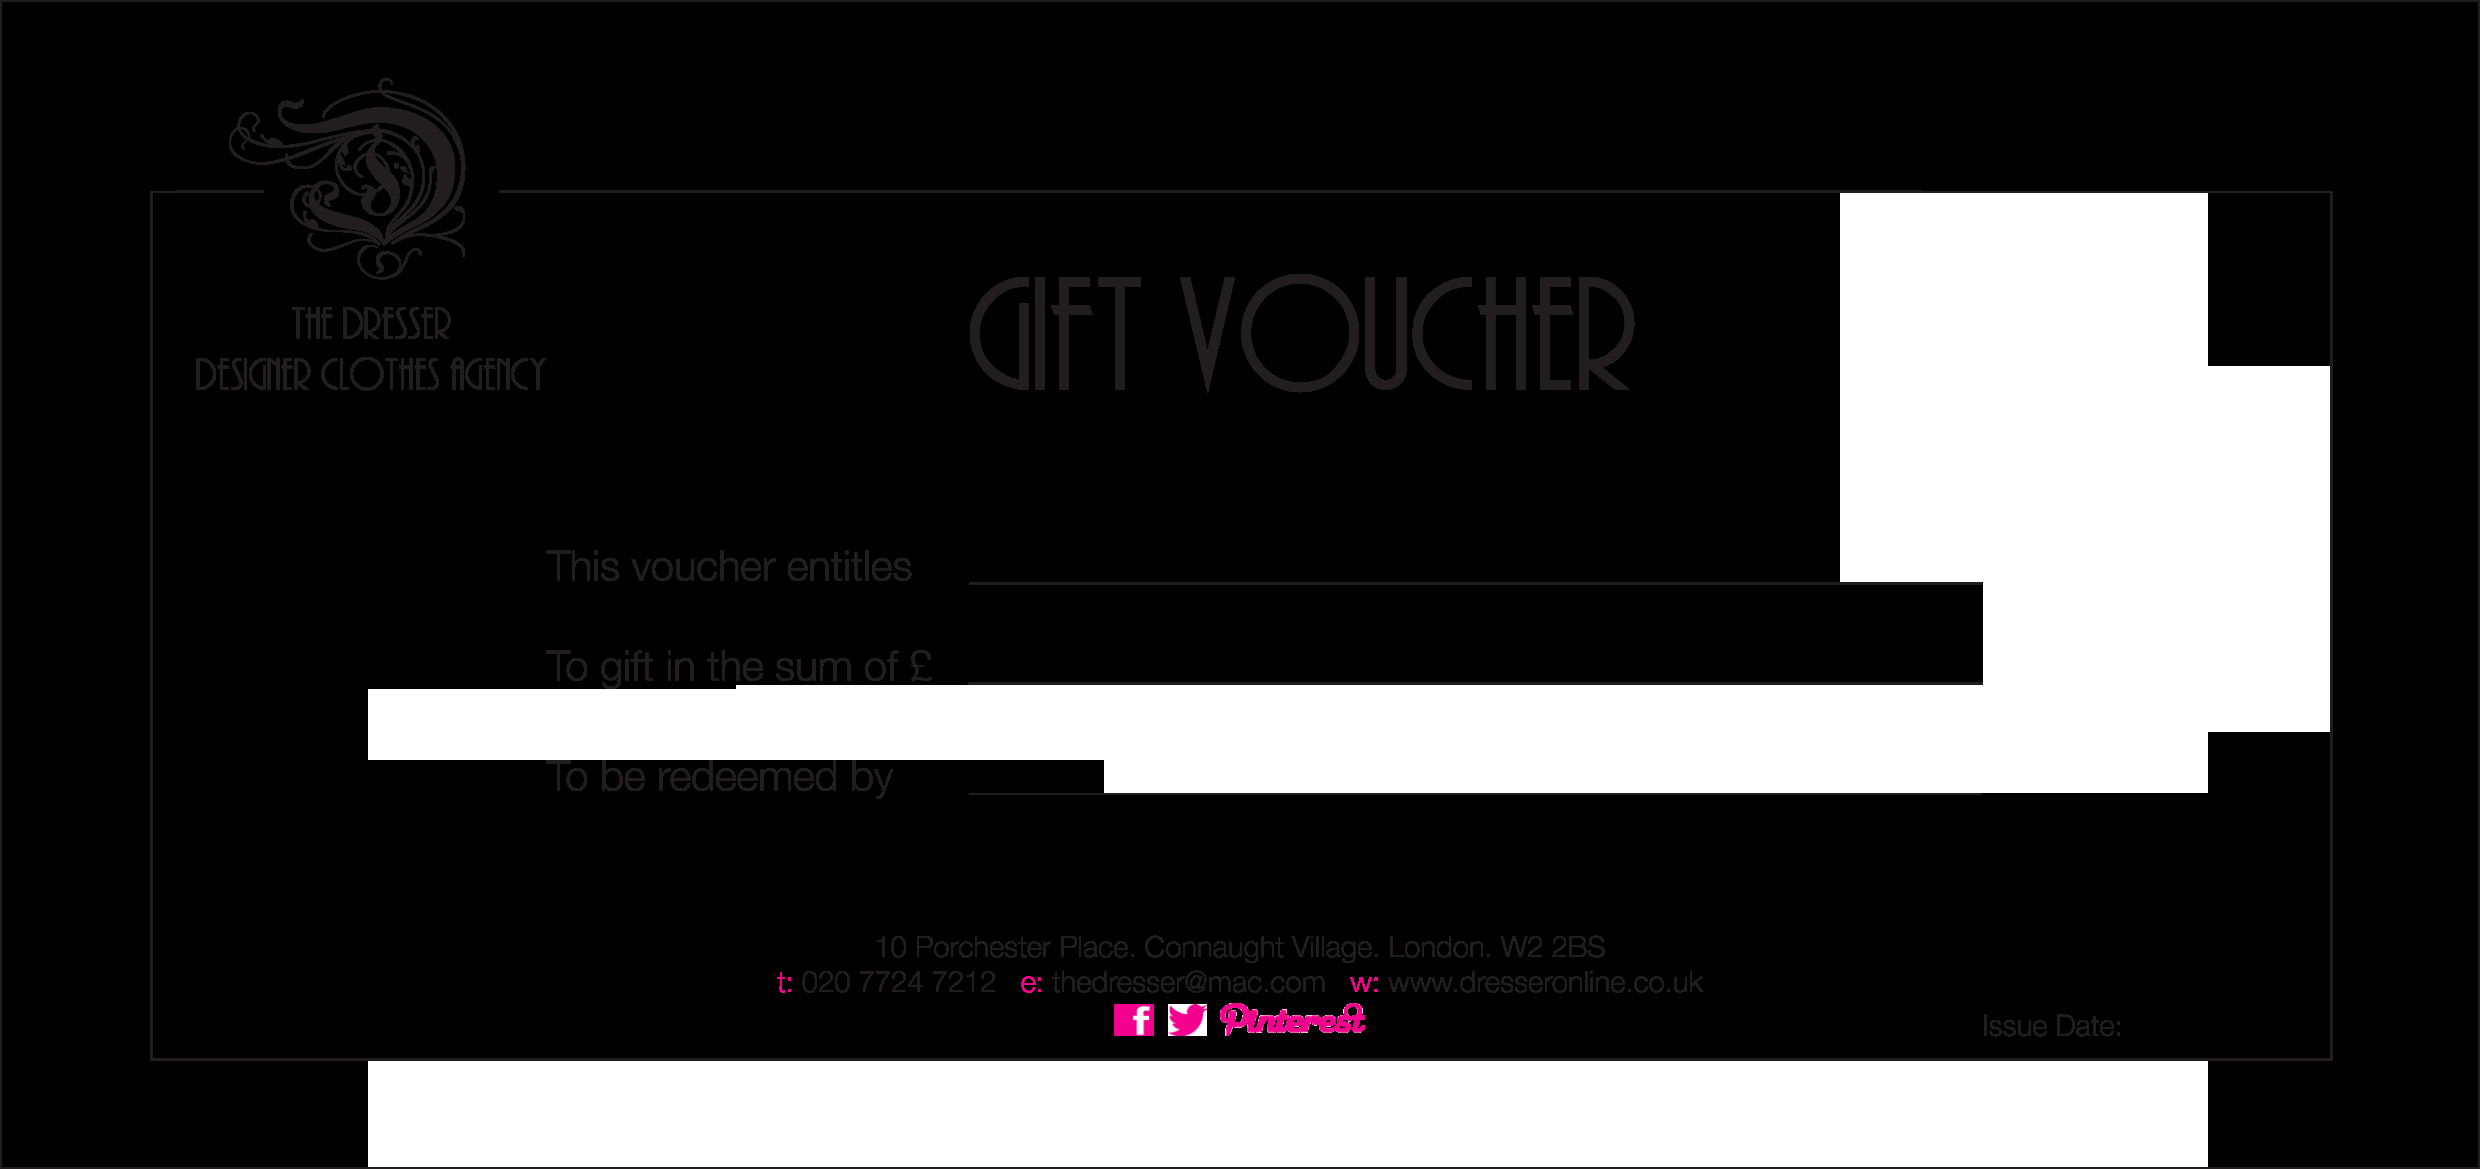 Gift Certificate Samples Free Templates Awesome Gift Voucher Template Word Free Download